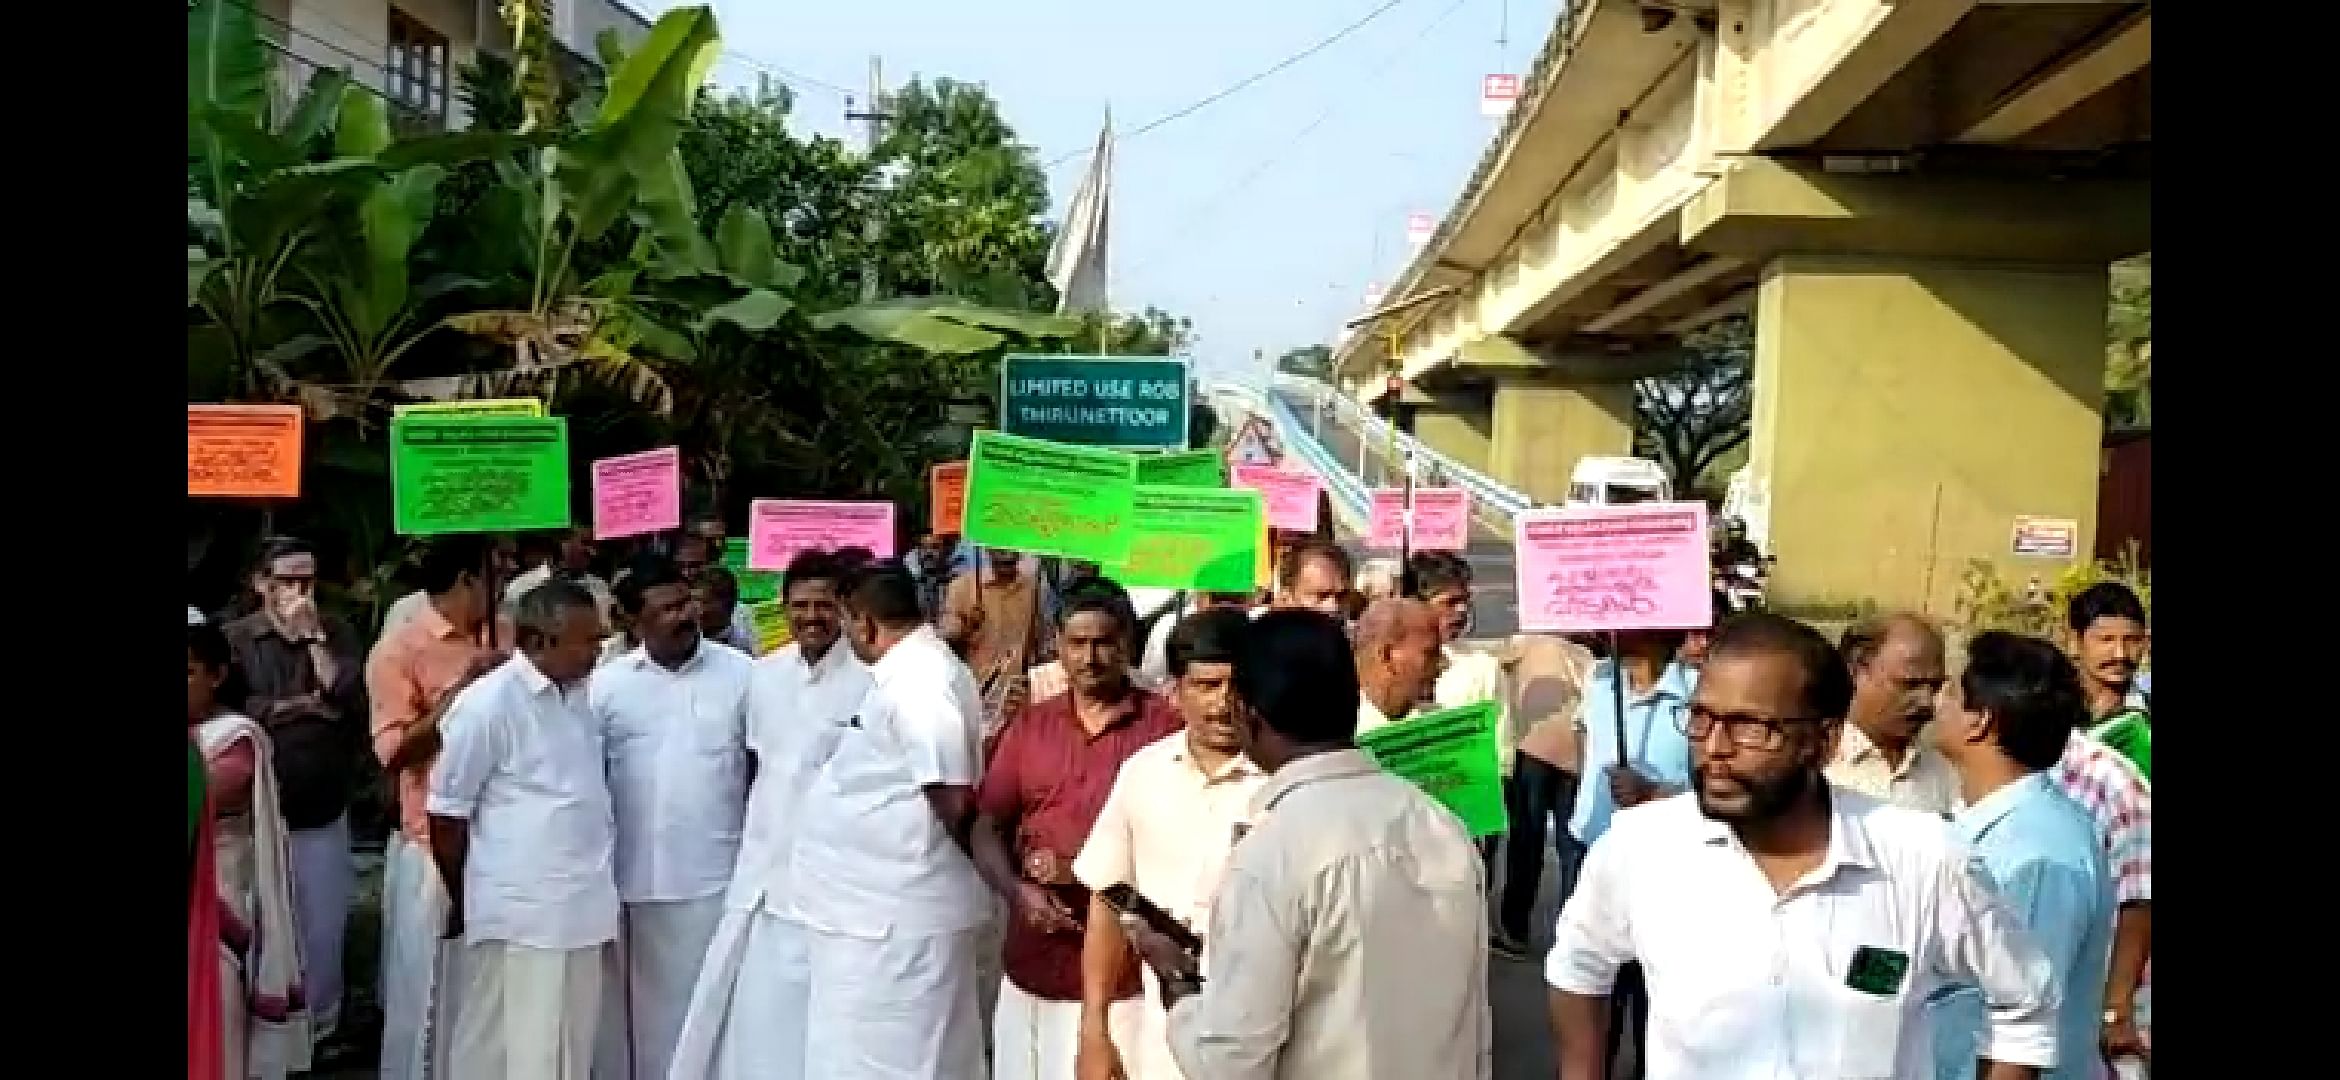 Protest by local residents raising concerns over the demolition of the five high rises in Kochi. (DH photo)